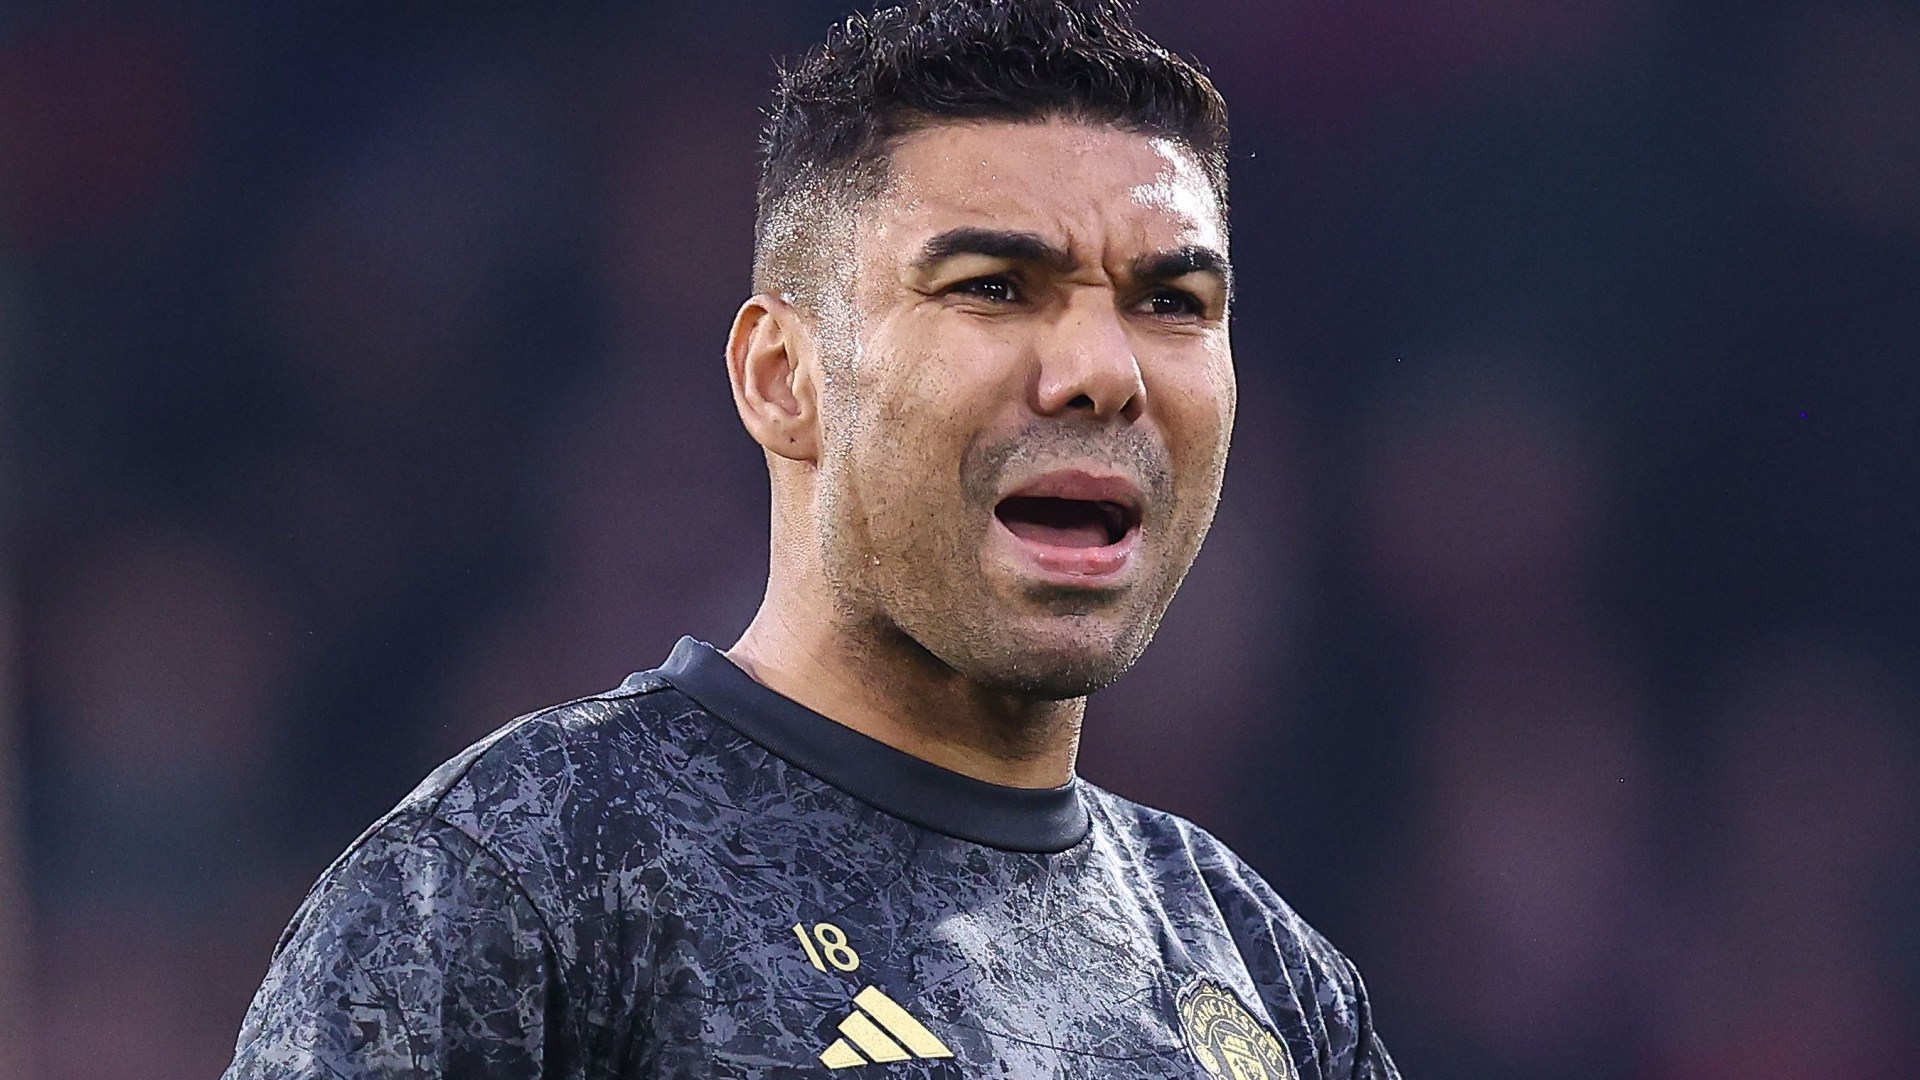 Casemiro DROPPED from Brazil squad just days after Jamie Carragher’s ‘disrespectful’ live TV rant about Man Utd star [Video]